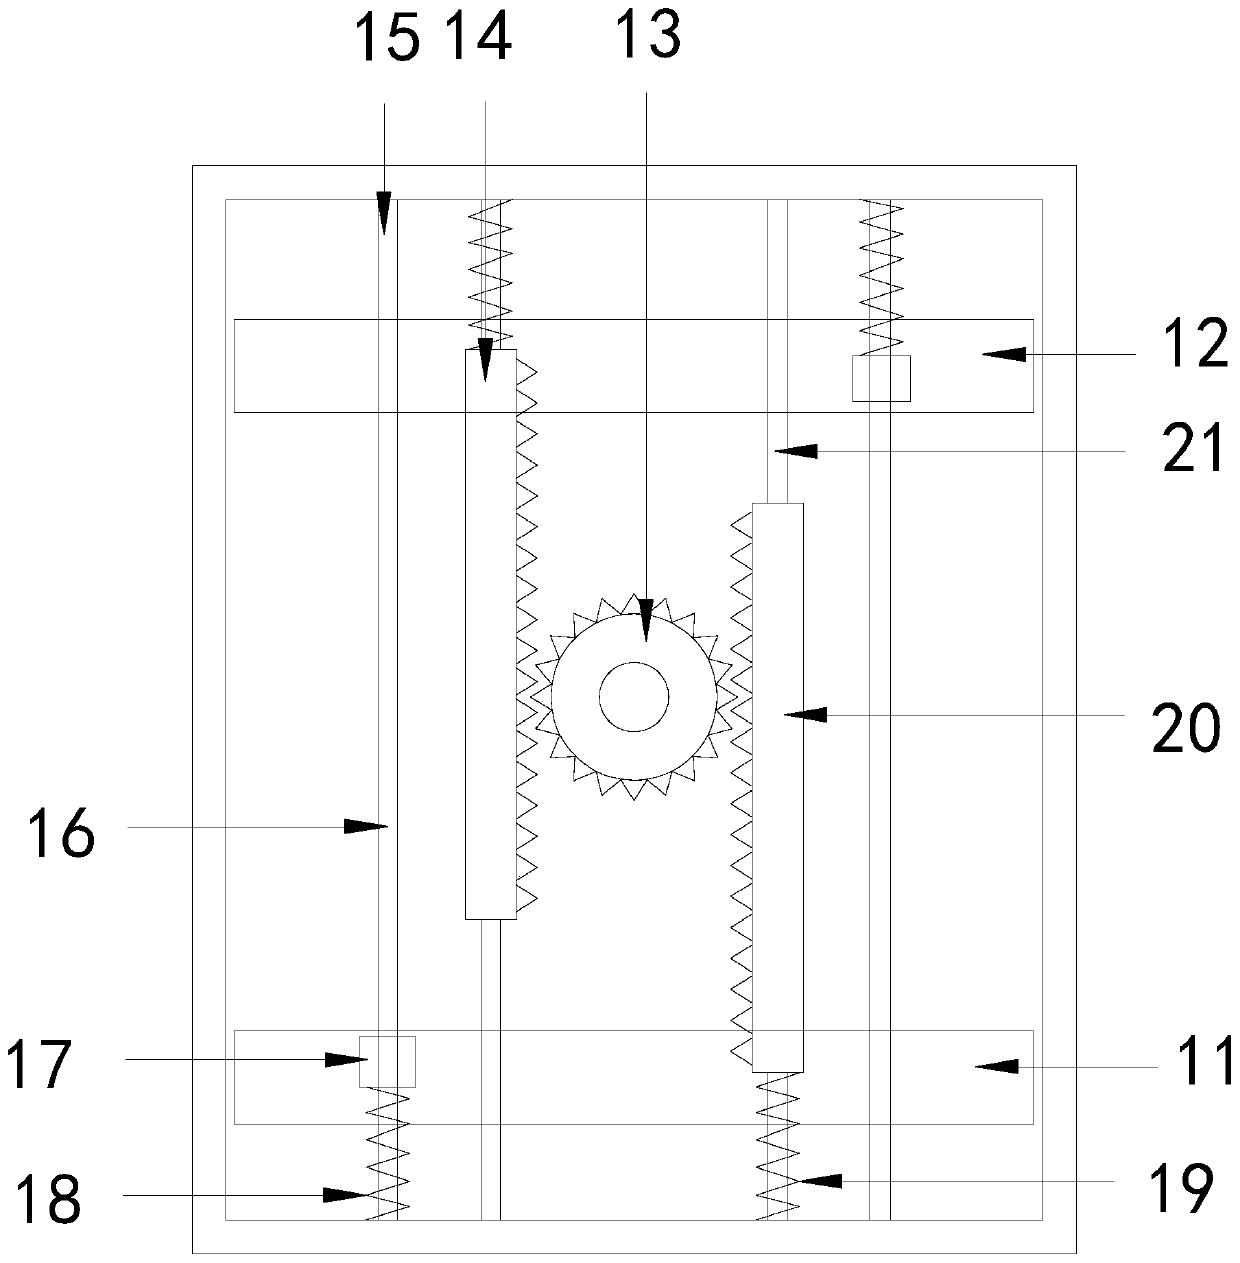 Tin device for processing printed circuit boards